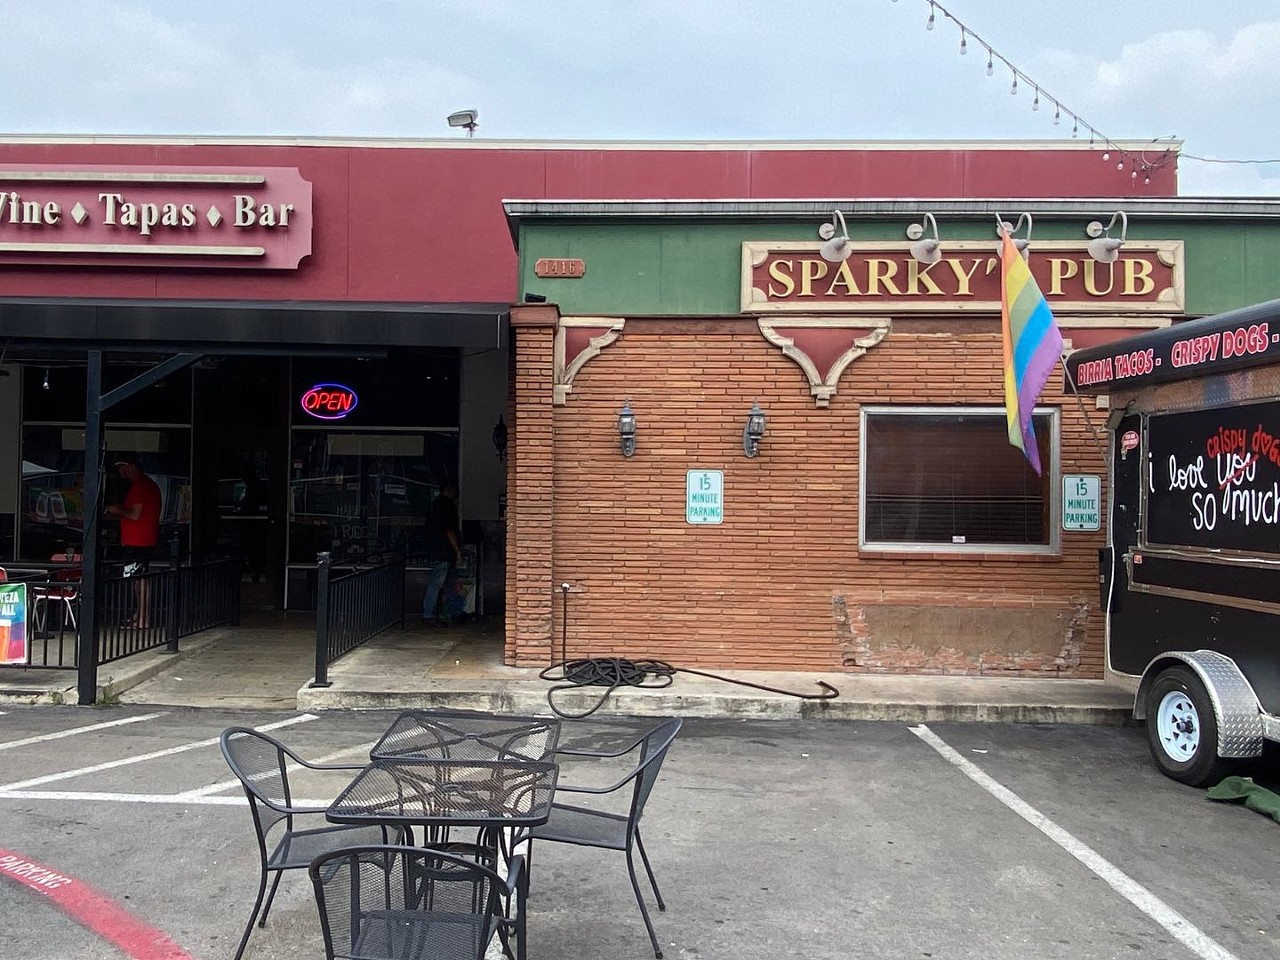 Sparky’s Pub
1416 N. Main Ave., (210) 320-5111, sparkyspub.com
Bringing a taste of England to the North Main Strip, Sparky’s Pub offers a relaxing atmosphere to grab a beer, play darts or shoot pool. In addition to the alcohol, Sparky’s also offers coffee, panini, pastries and other eats.